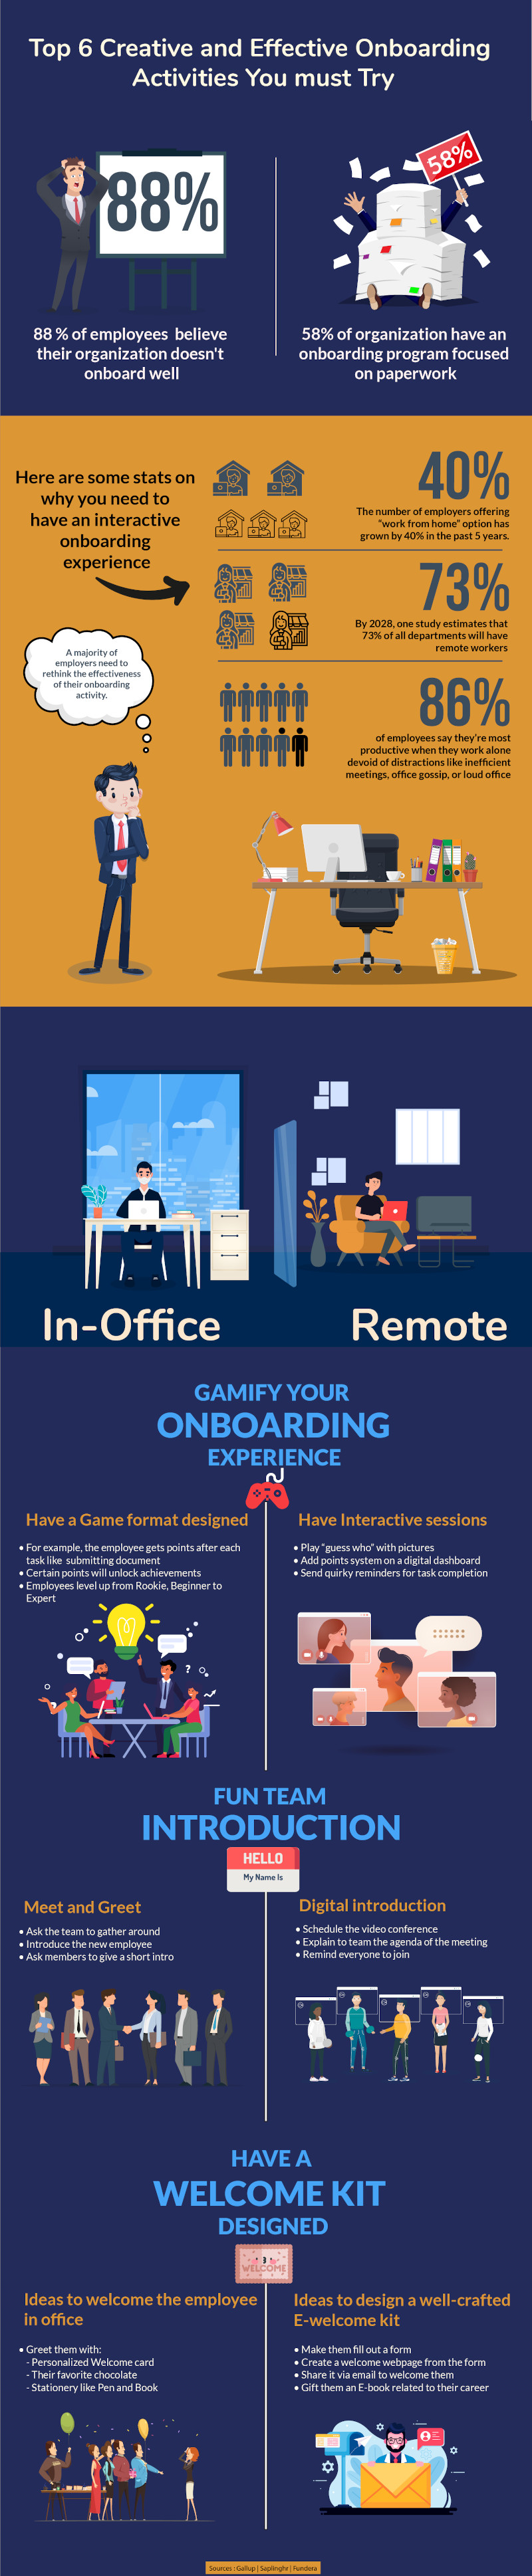 Infographic listing the effective onboarding activities for new employees